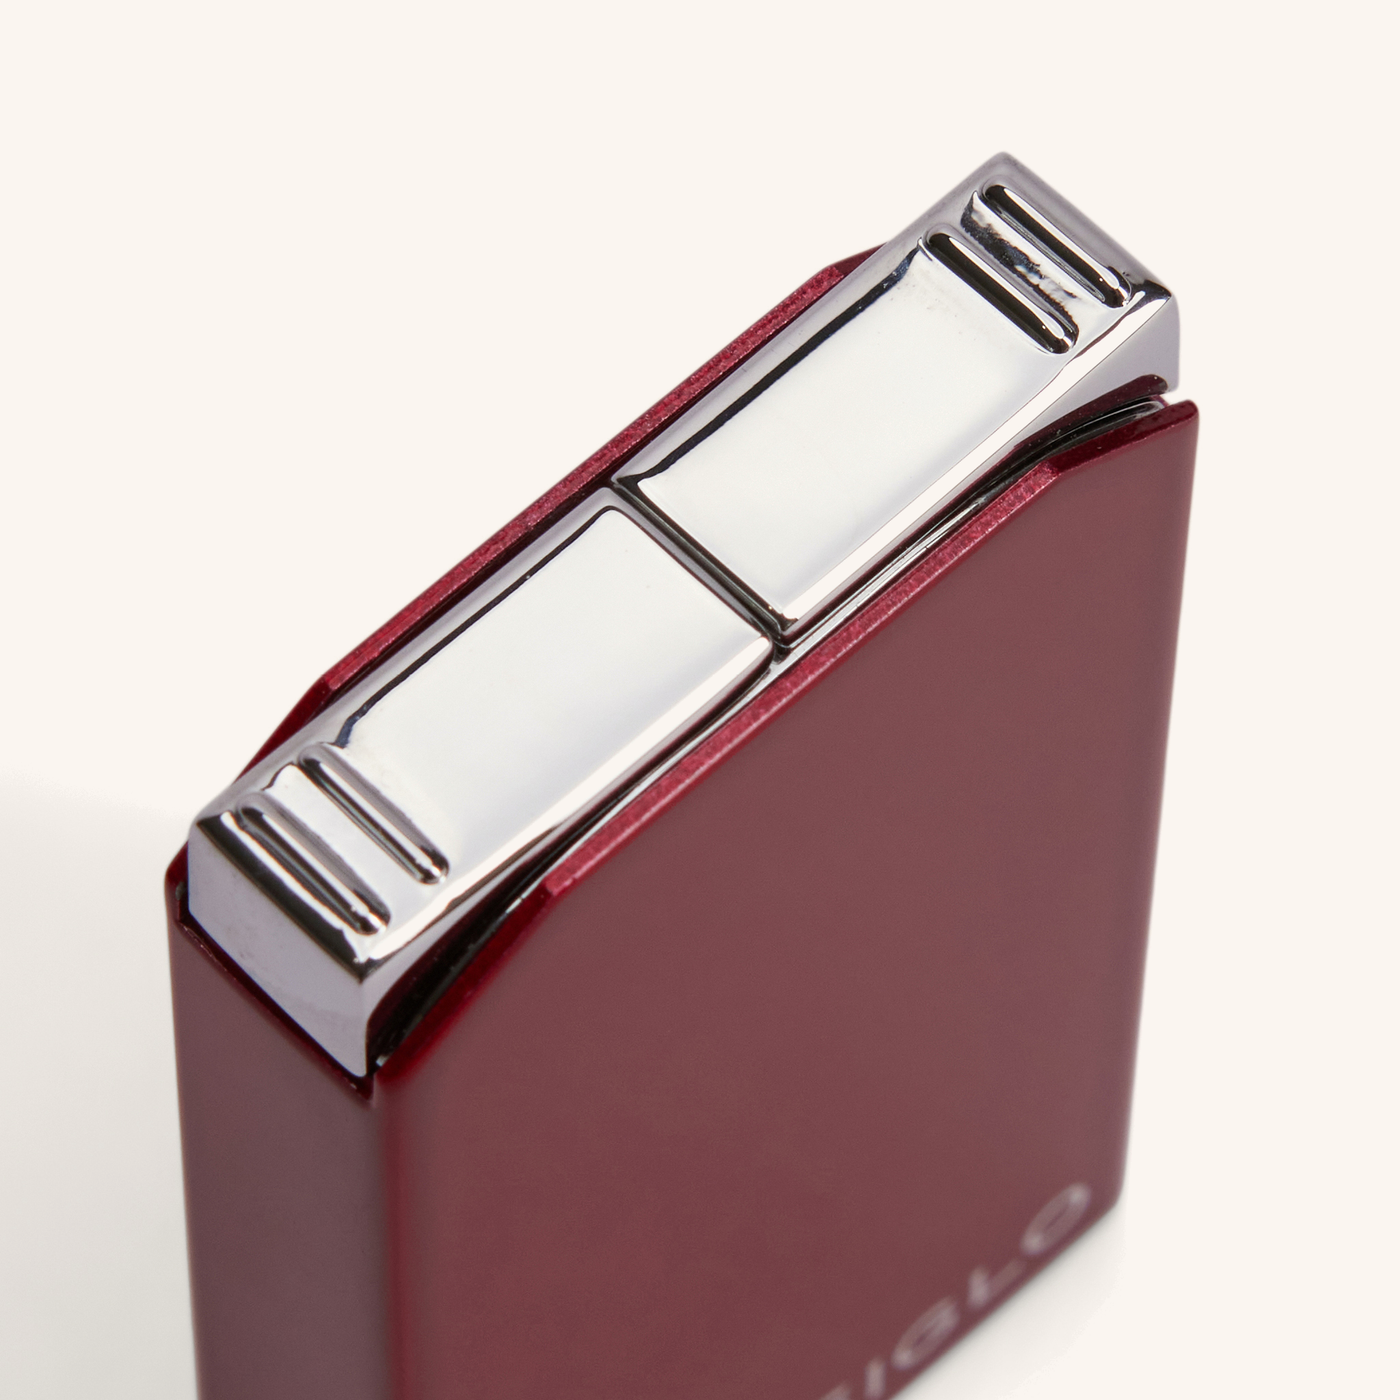 Siglo Twin Flame Lighter Red